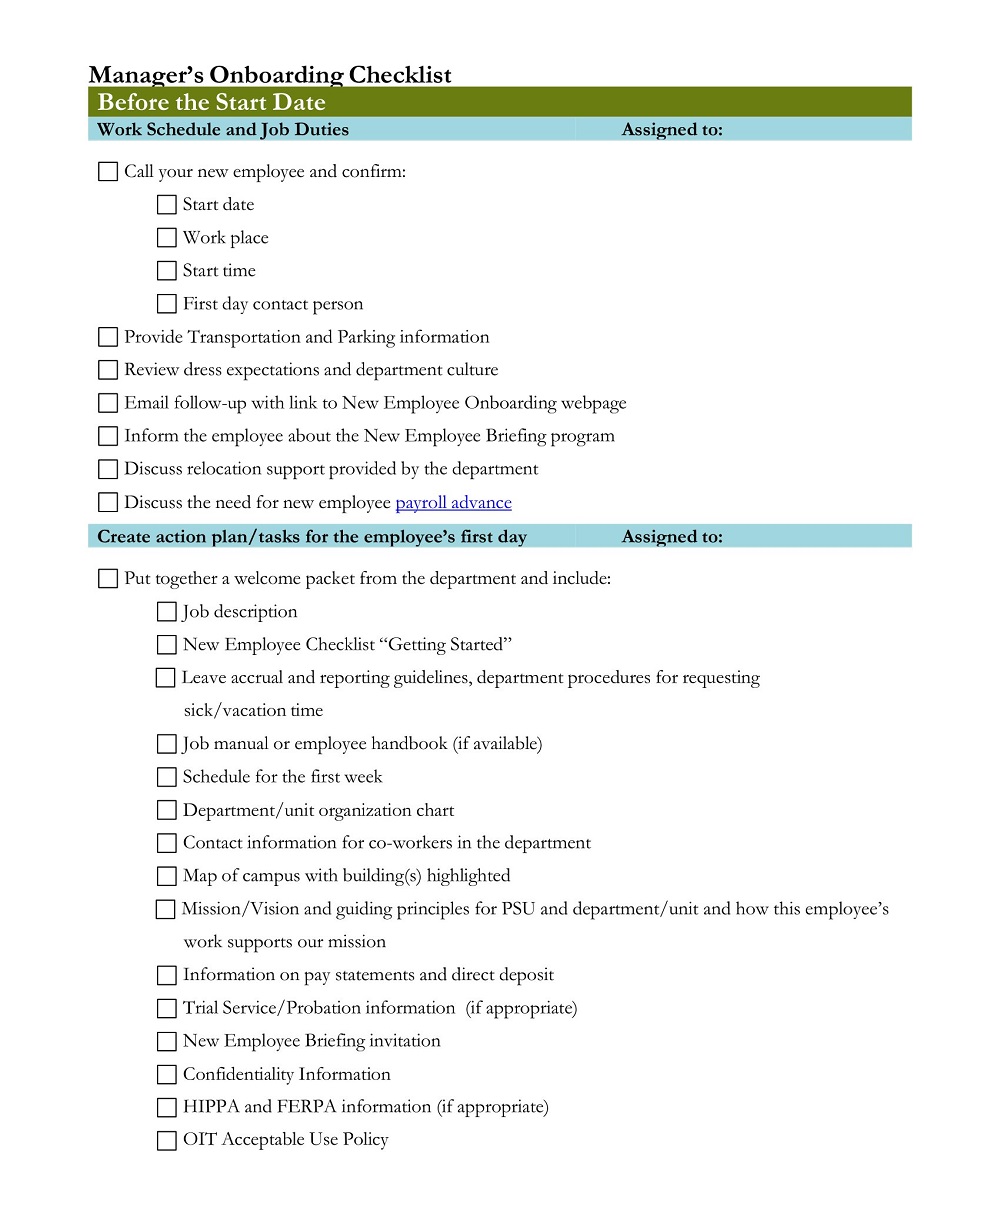 Managers Onboarding Checklist Template